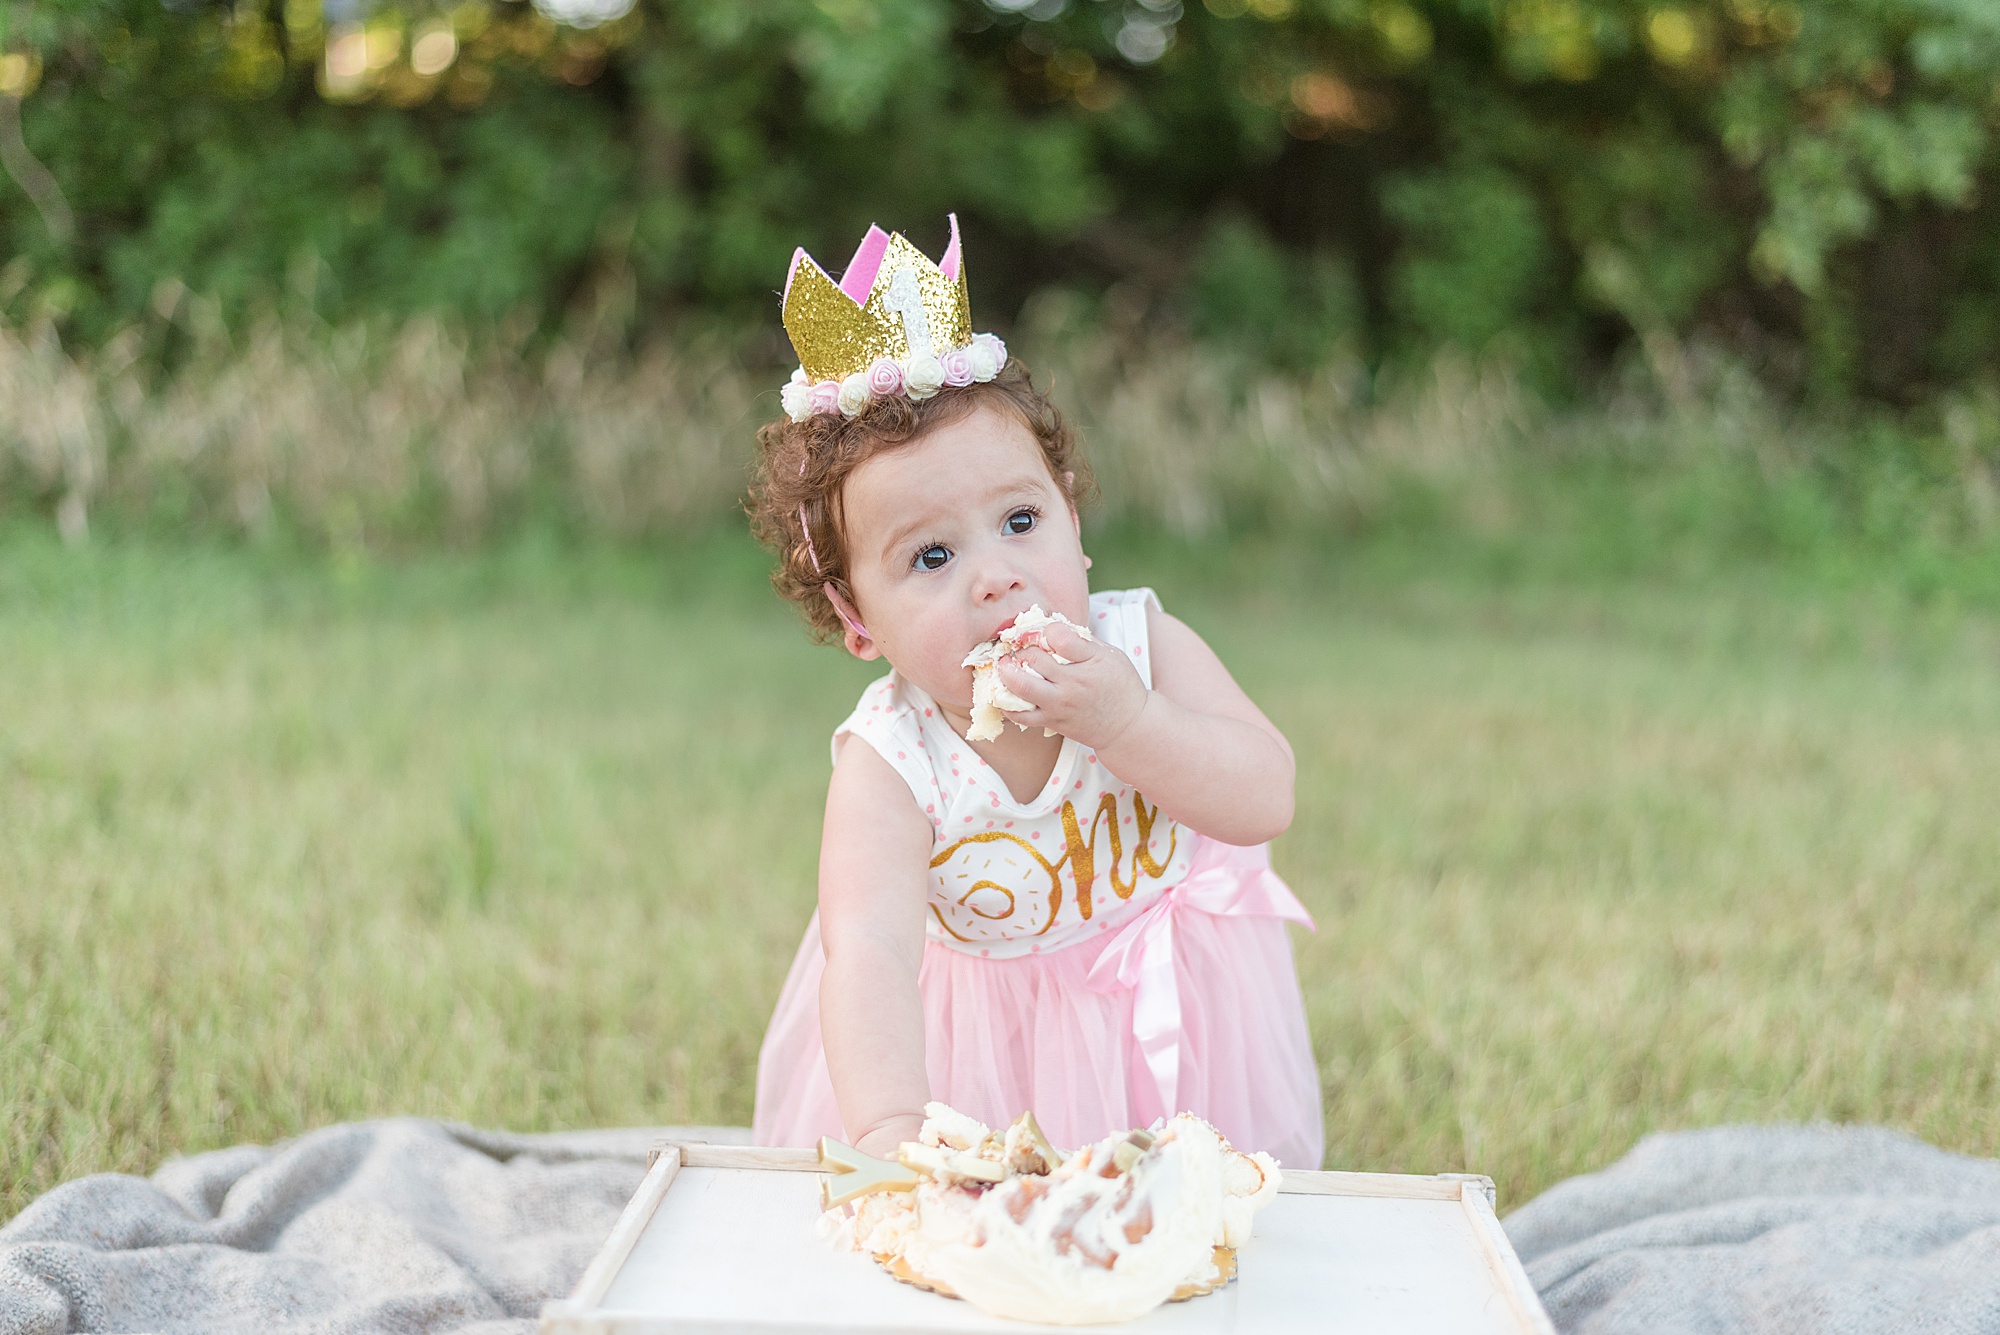 One year old cake smash in Plano TX